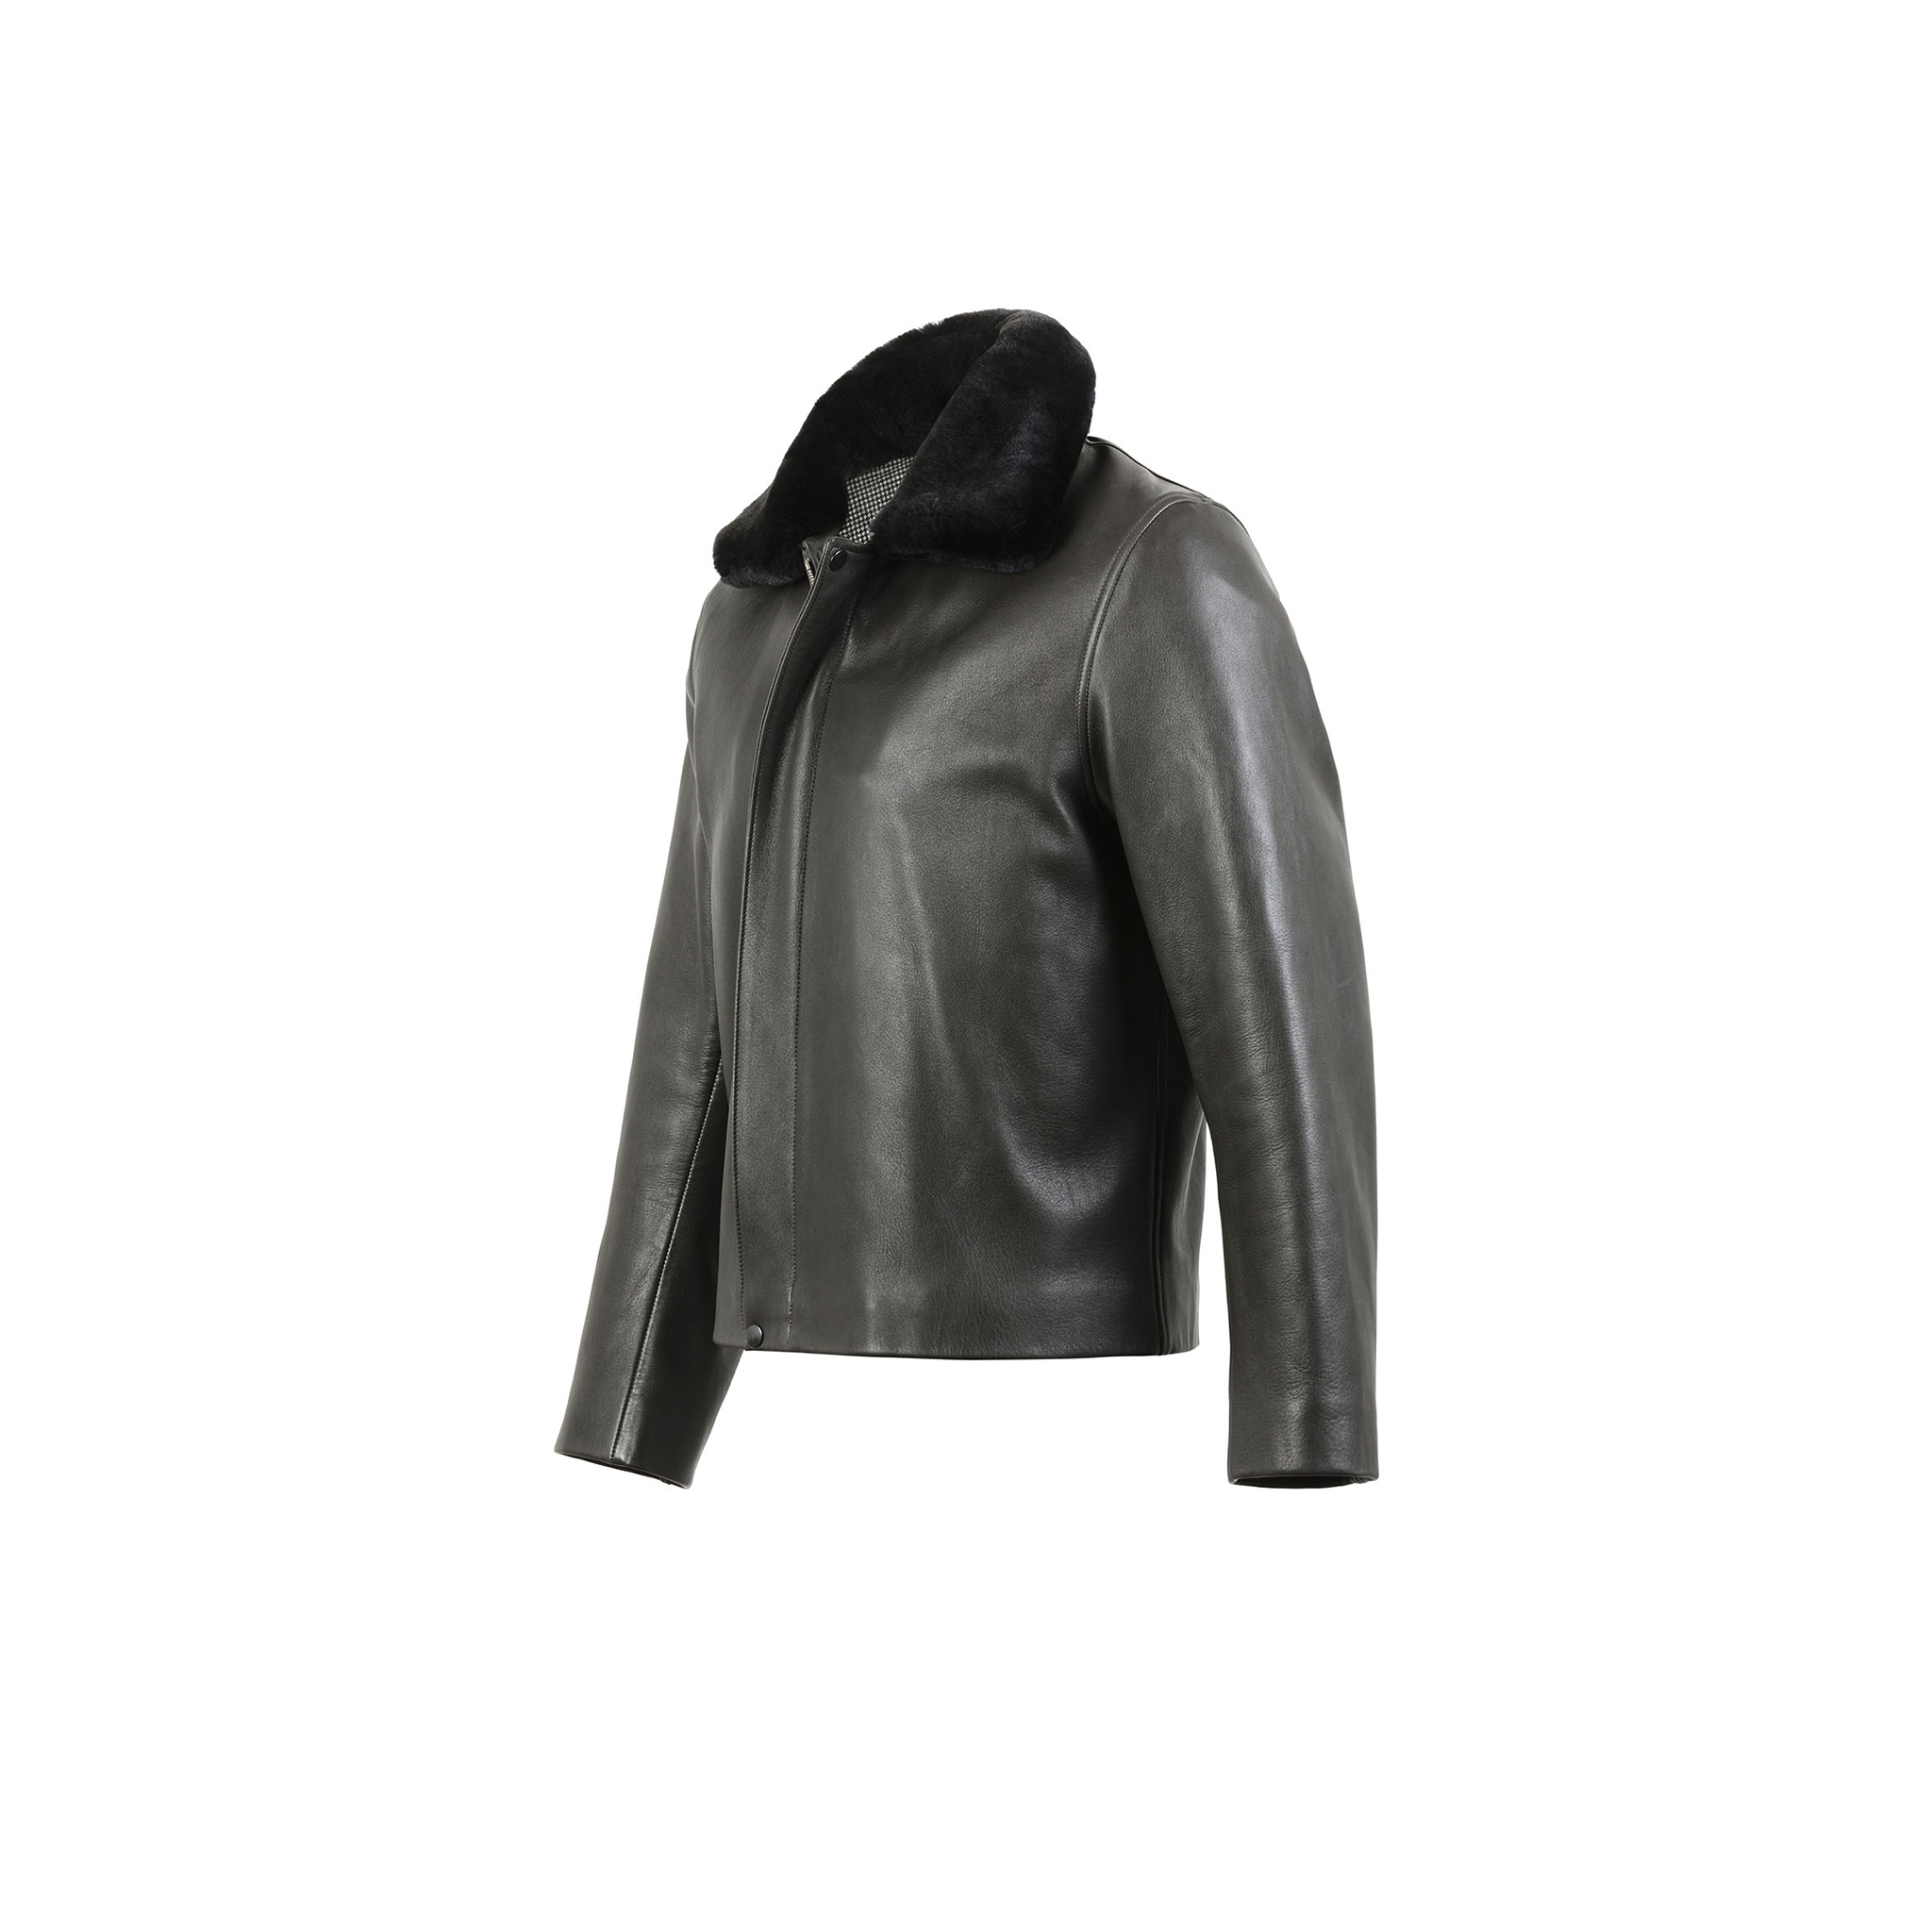 Blouson Bomber - Doublure Fox Brothers - Cuir glacé anthracite